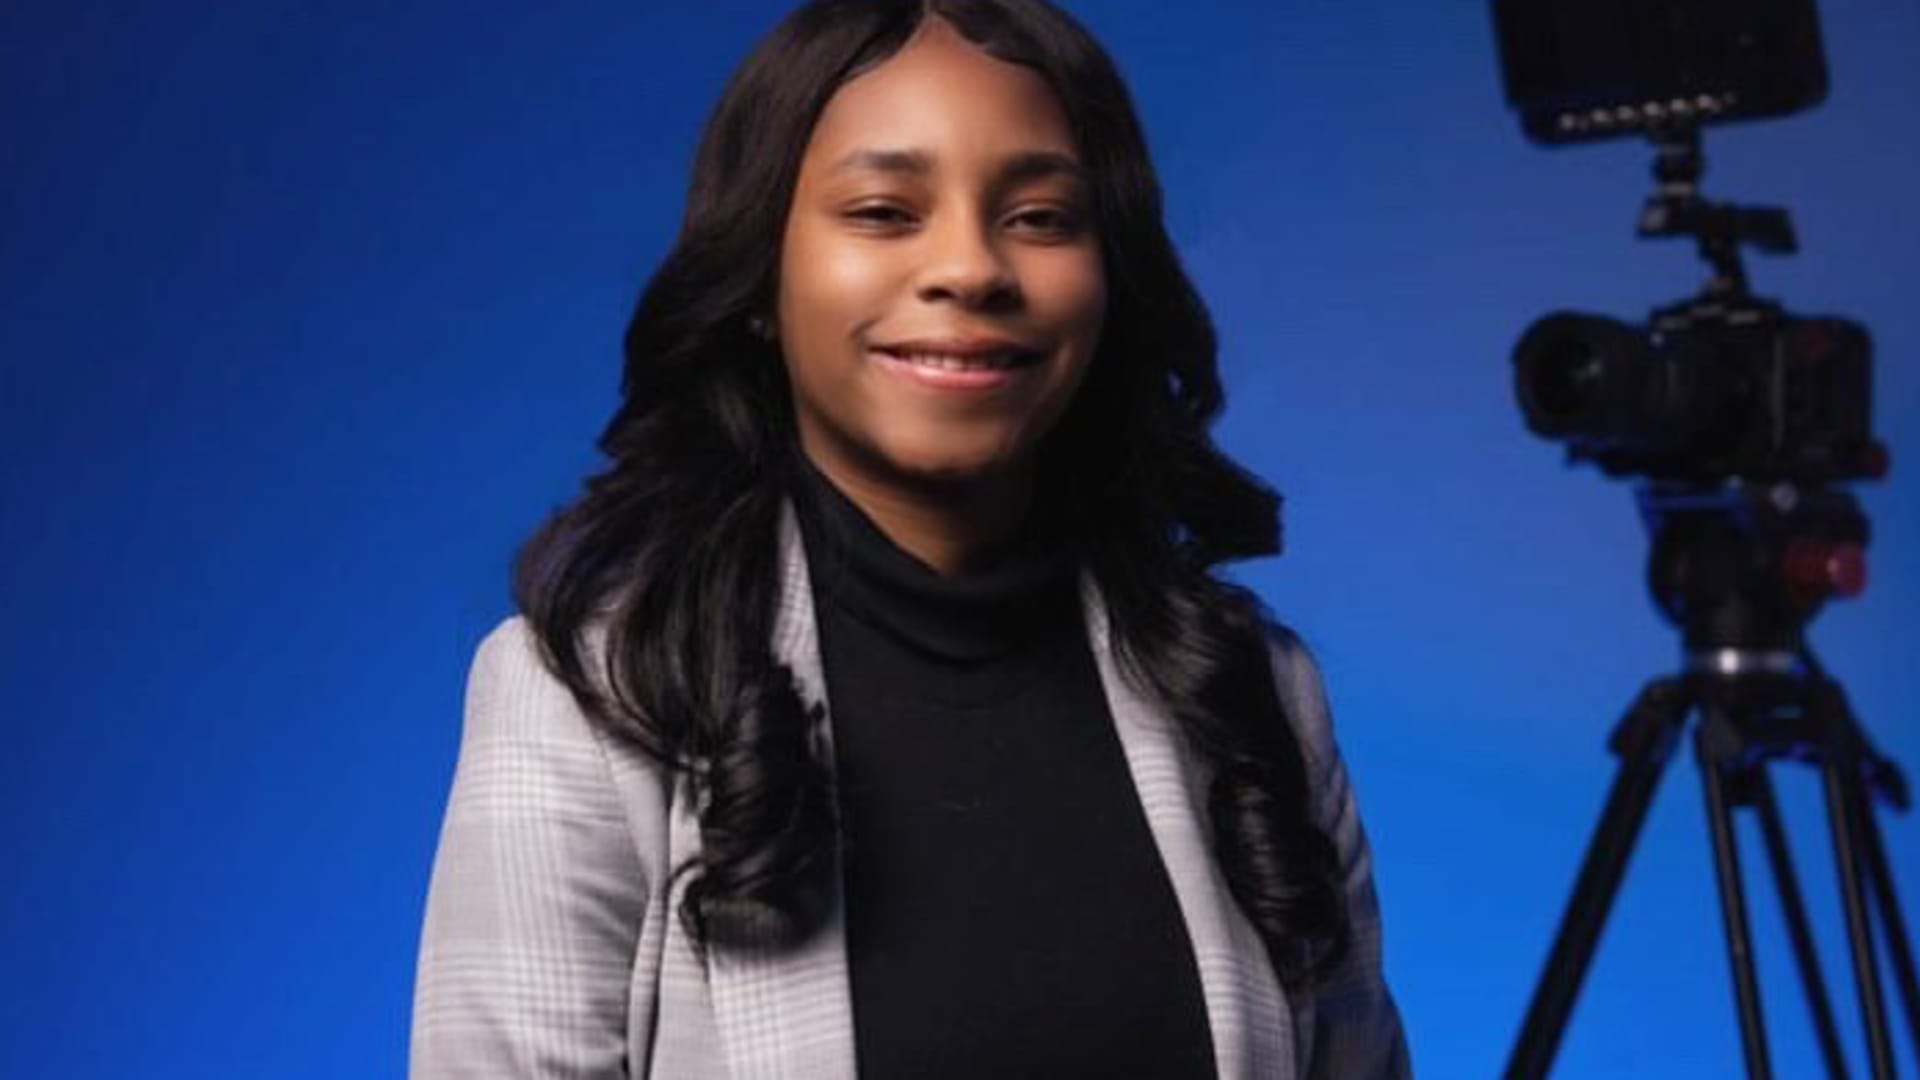 Chaselynn Grant, a rising senior at Southern University and A&M College and the first HBCU to Hollywood intern for Nucontext